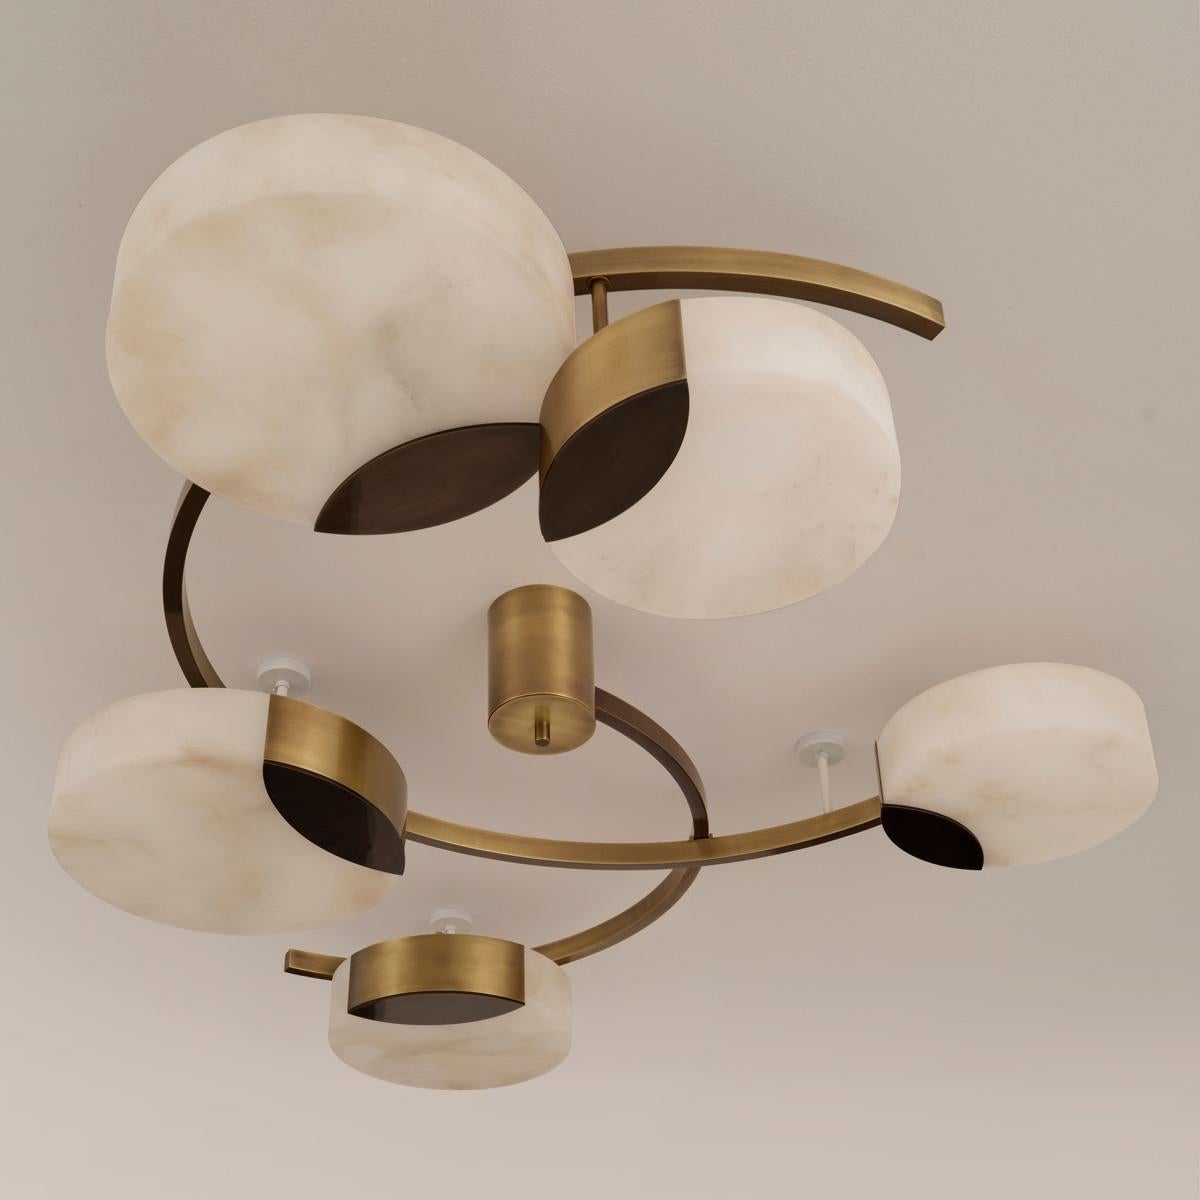 Modern Cloud N.5 Ceiling Light by Gaspare Asaro-Bronze Finish For Sale